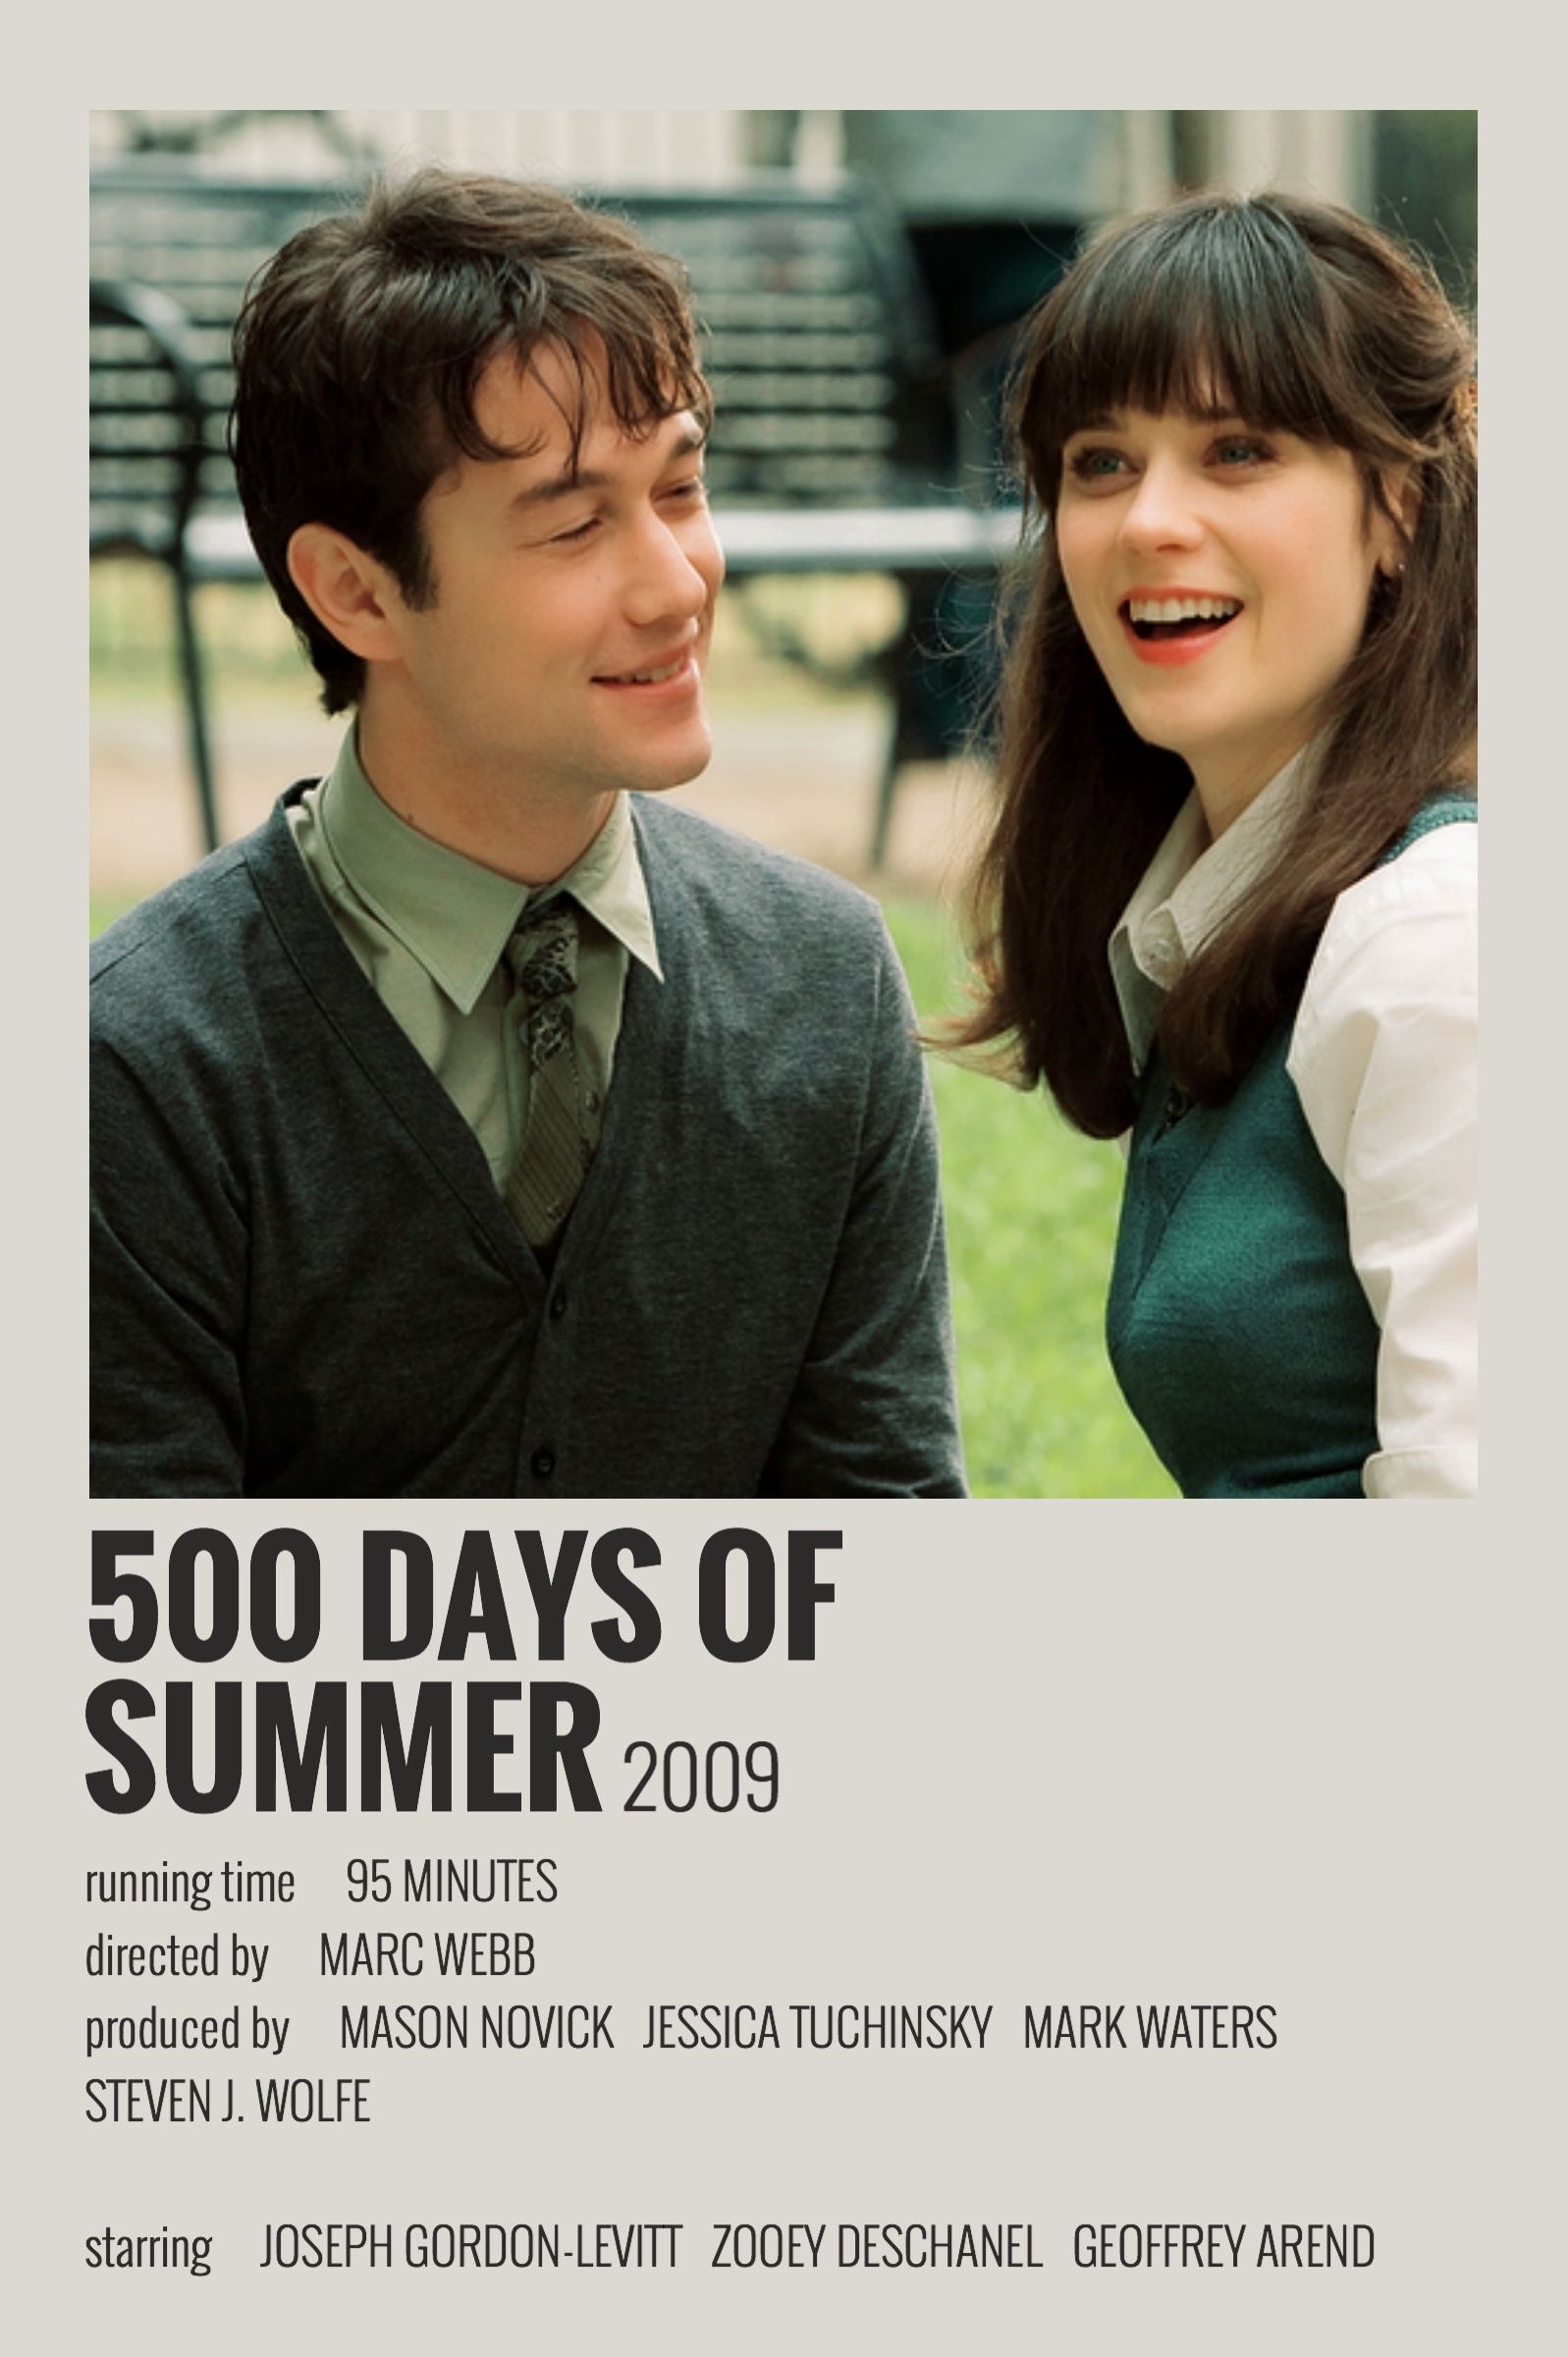 https://static.wikia.nocookie.net/filmguide/images/a/ad/500_Days_of_Summer.jpg/revision/latest?cb=20220821062207